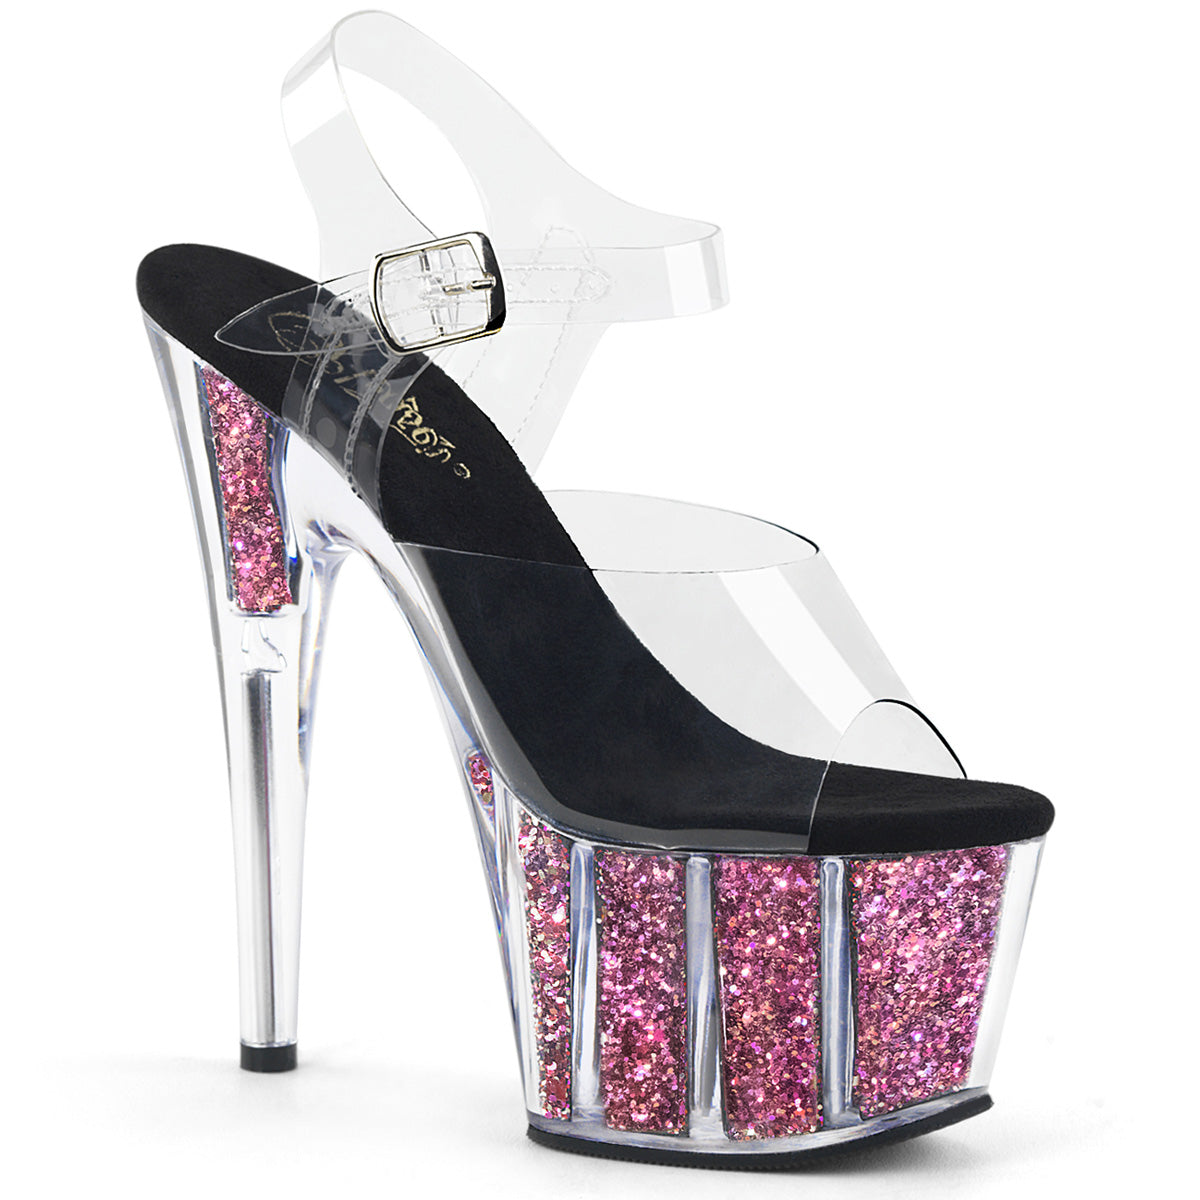 ADORE-708CG 7" Clear and Pink Confetti Pole Dancing Sexy Shoes